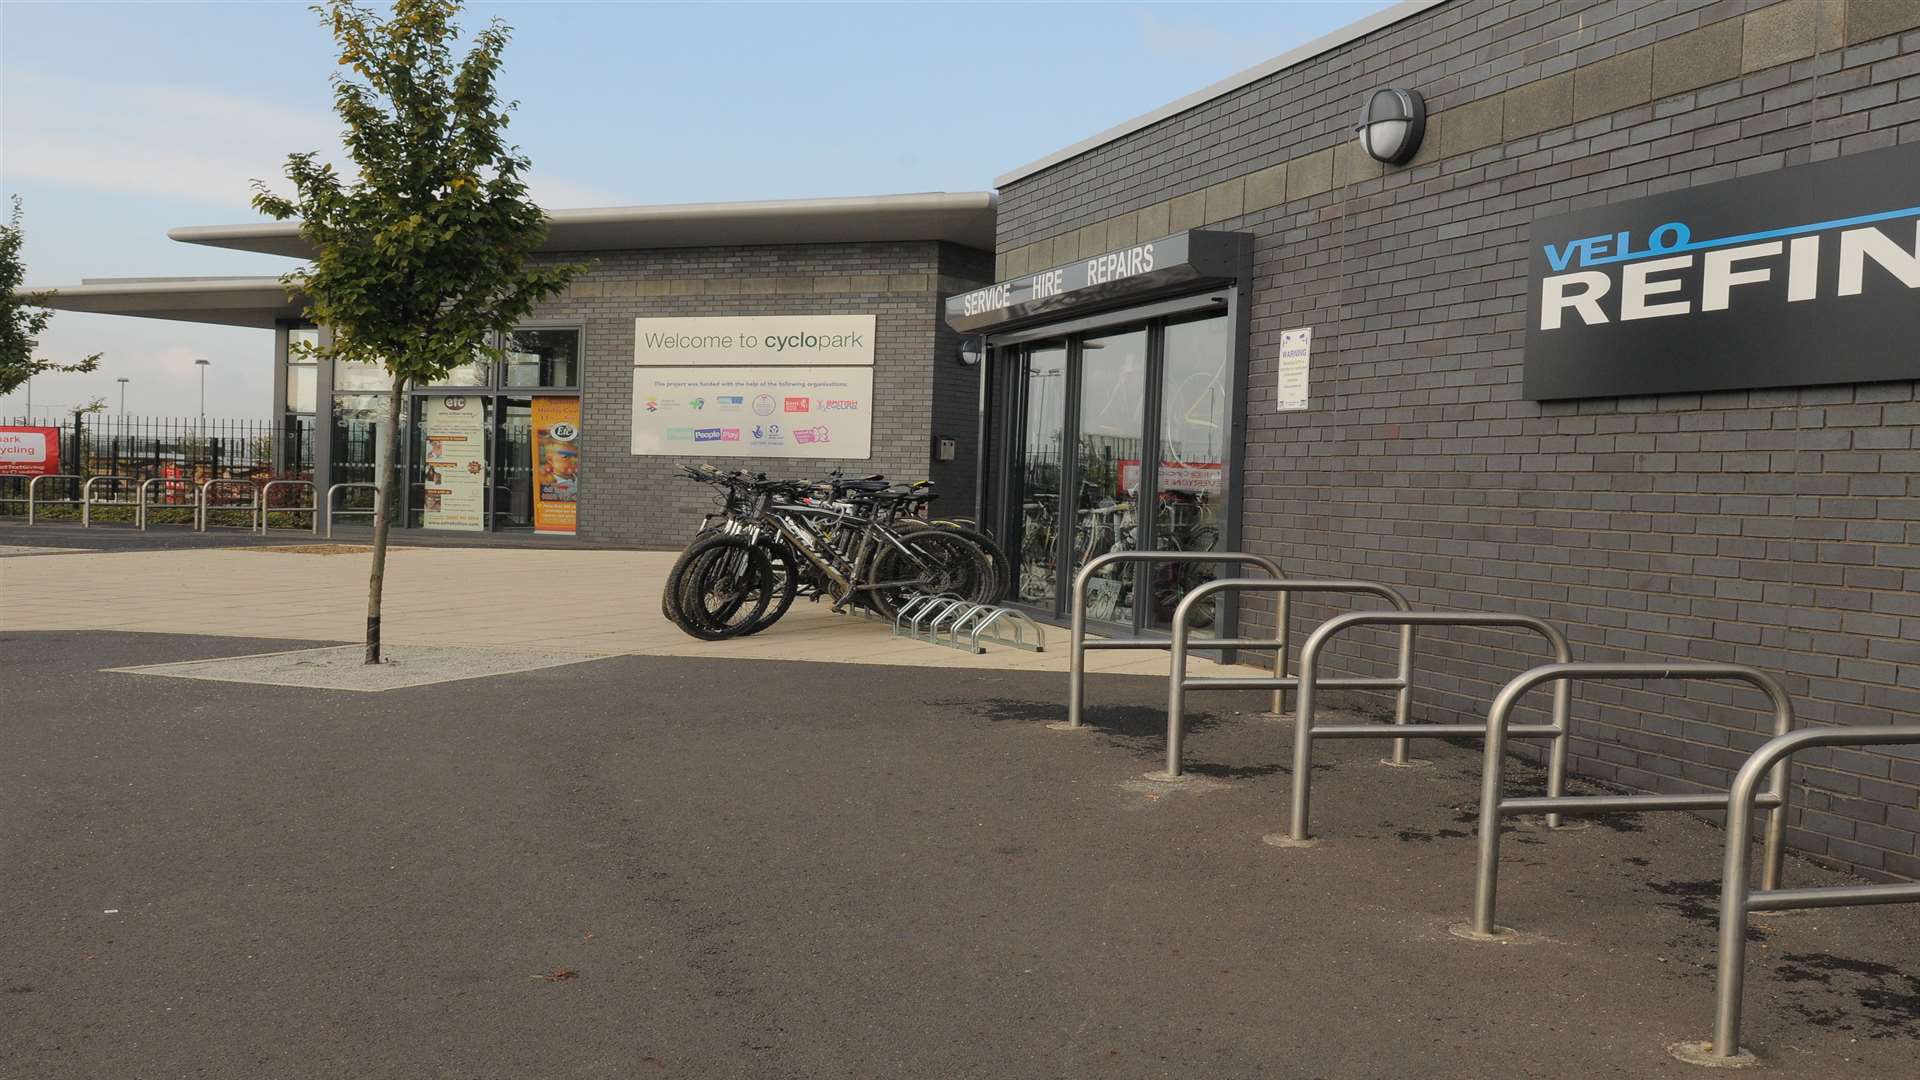 The public have been commenting on a two mile route from Gravesend station to the Cyclopark.